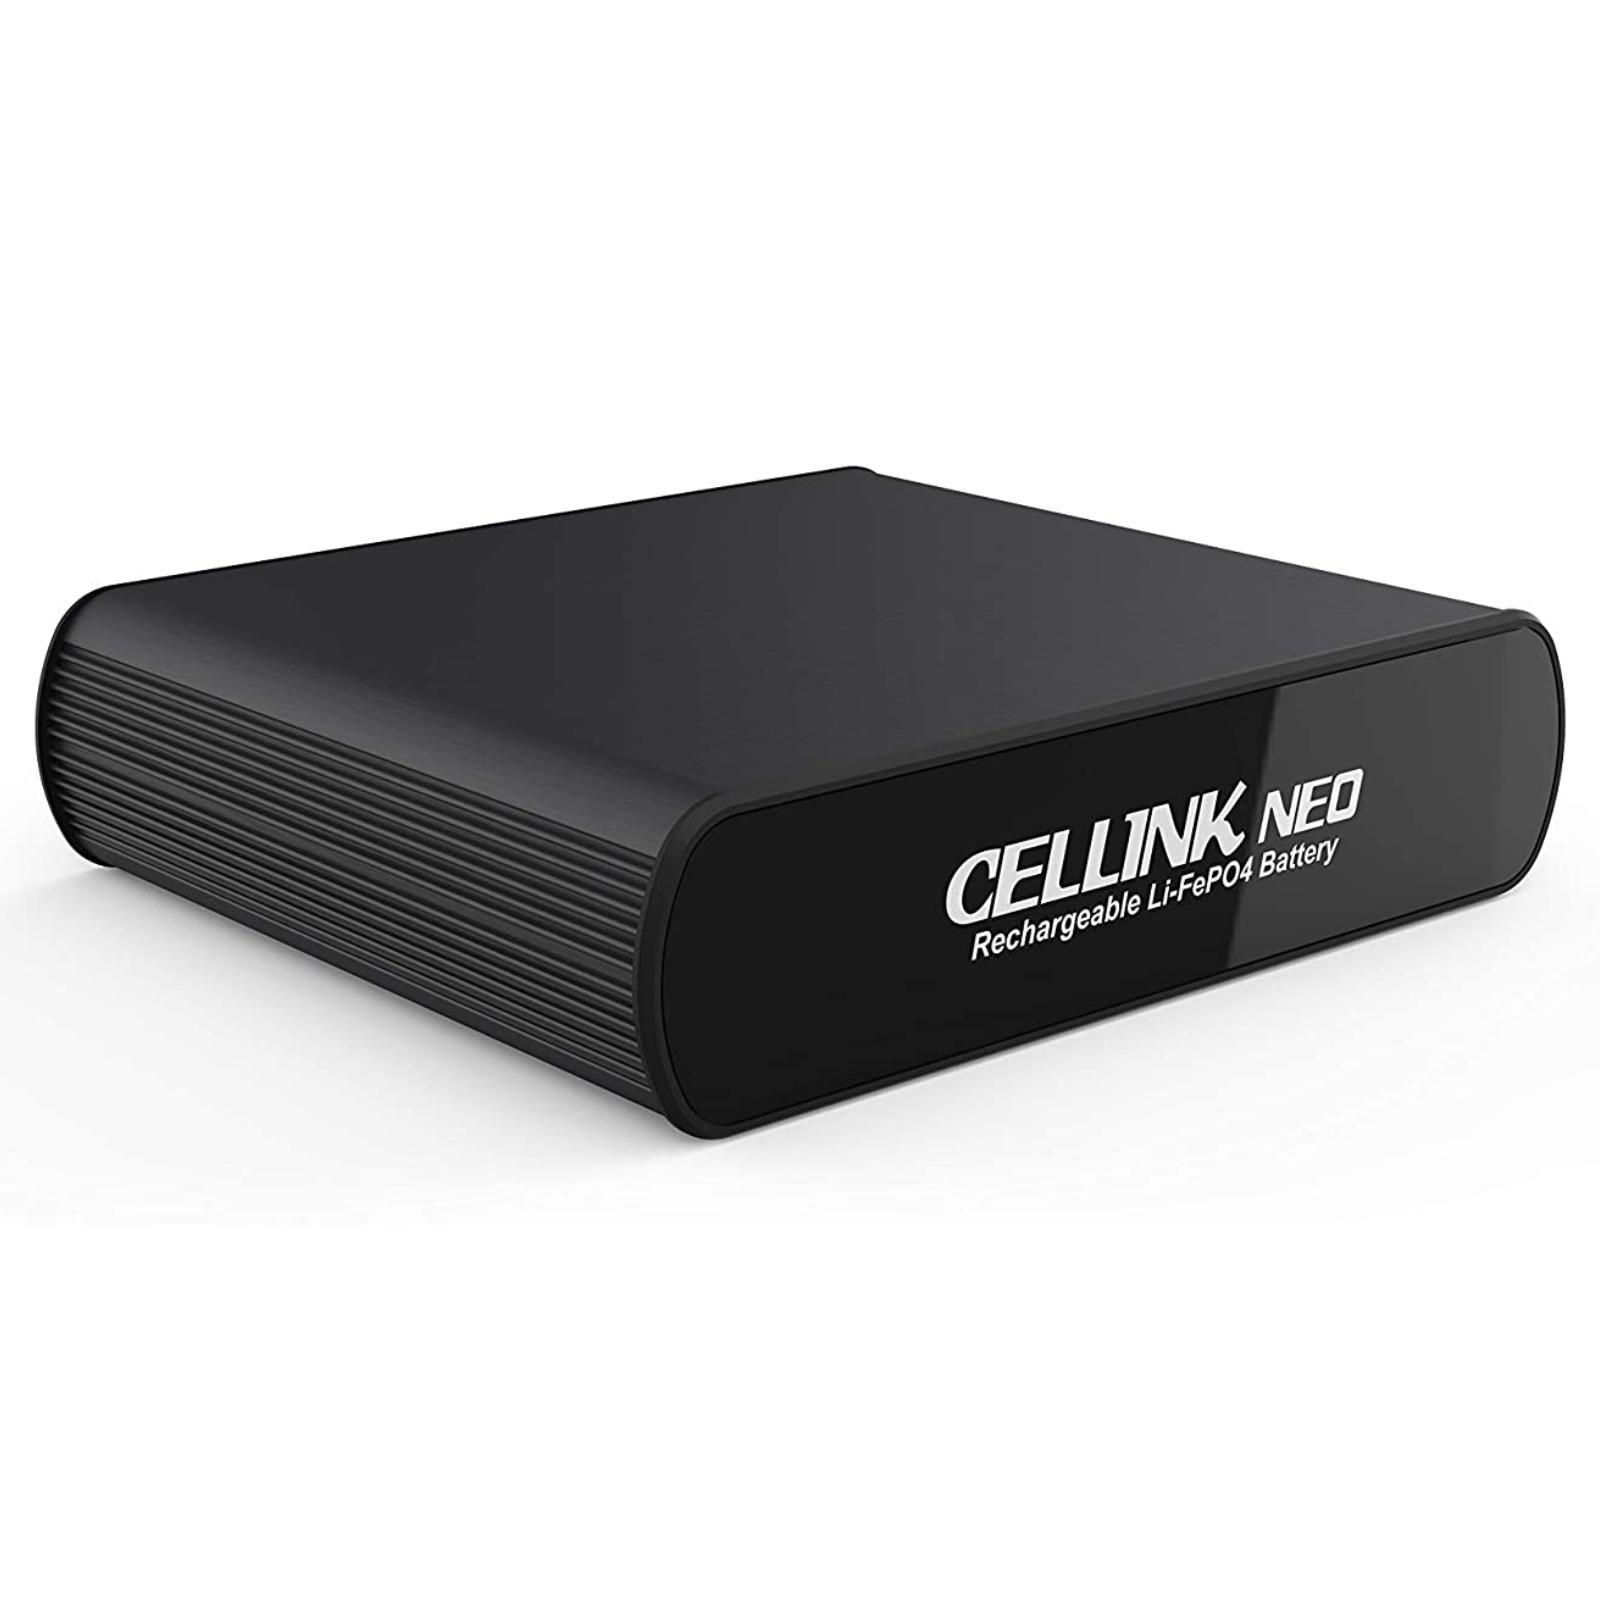 Cellink NEO 5 Battery Pack extended parking mode